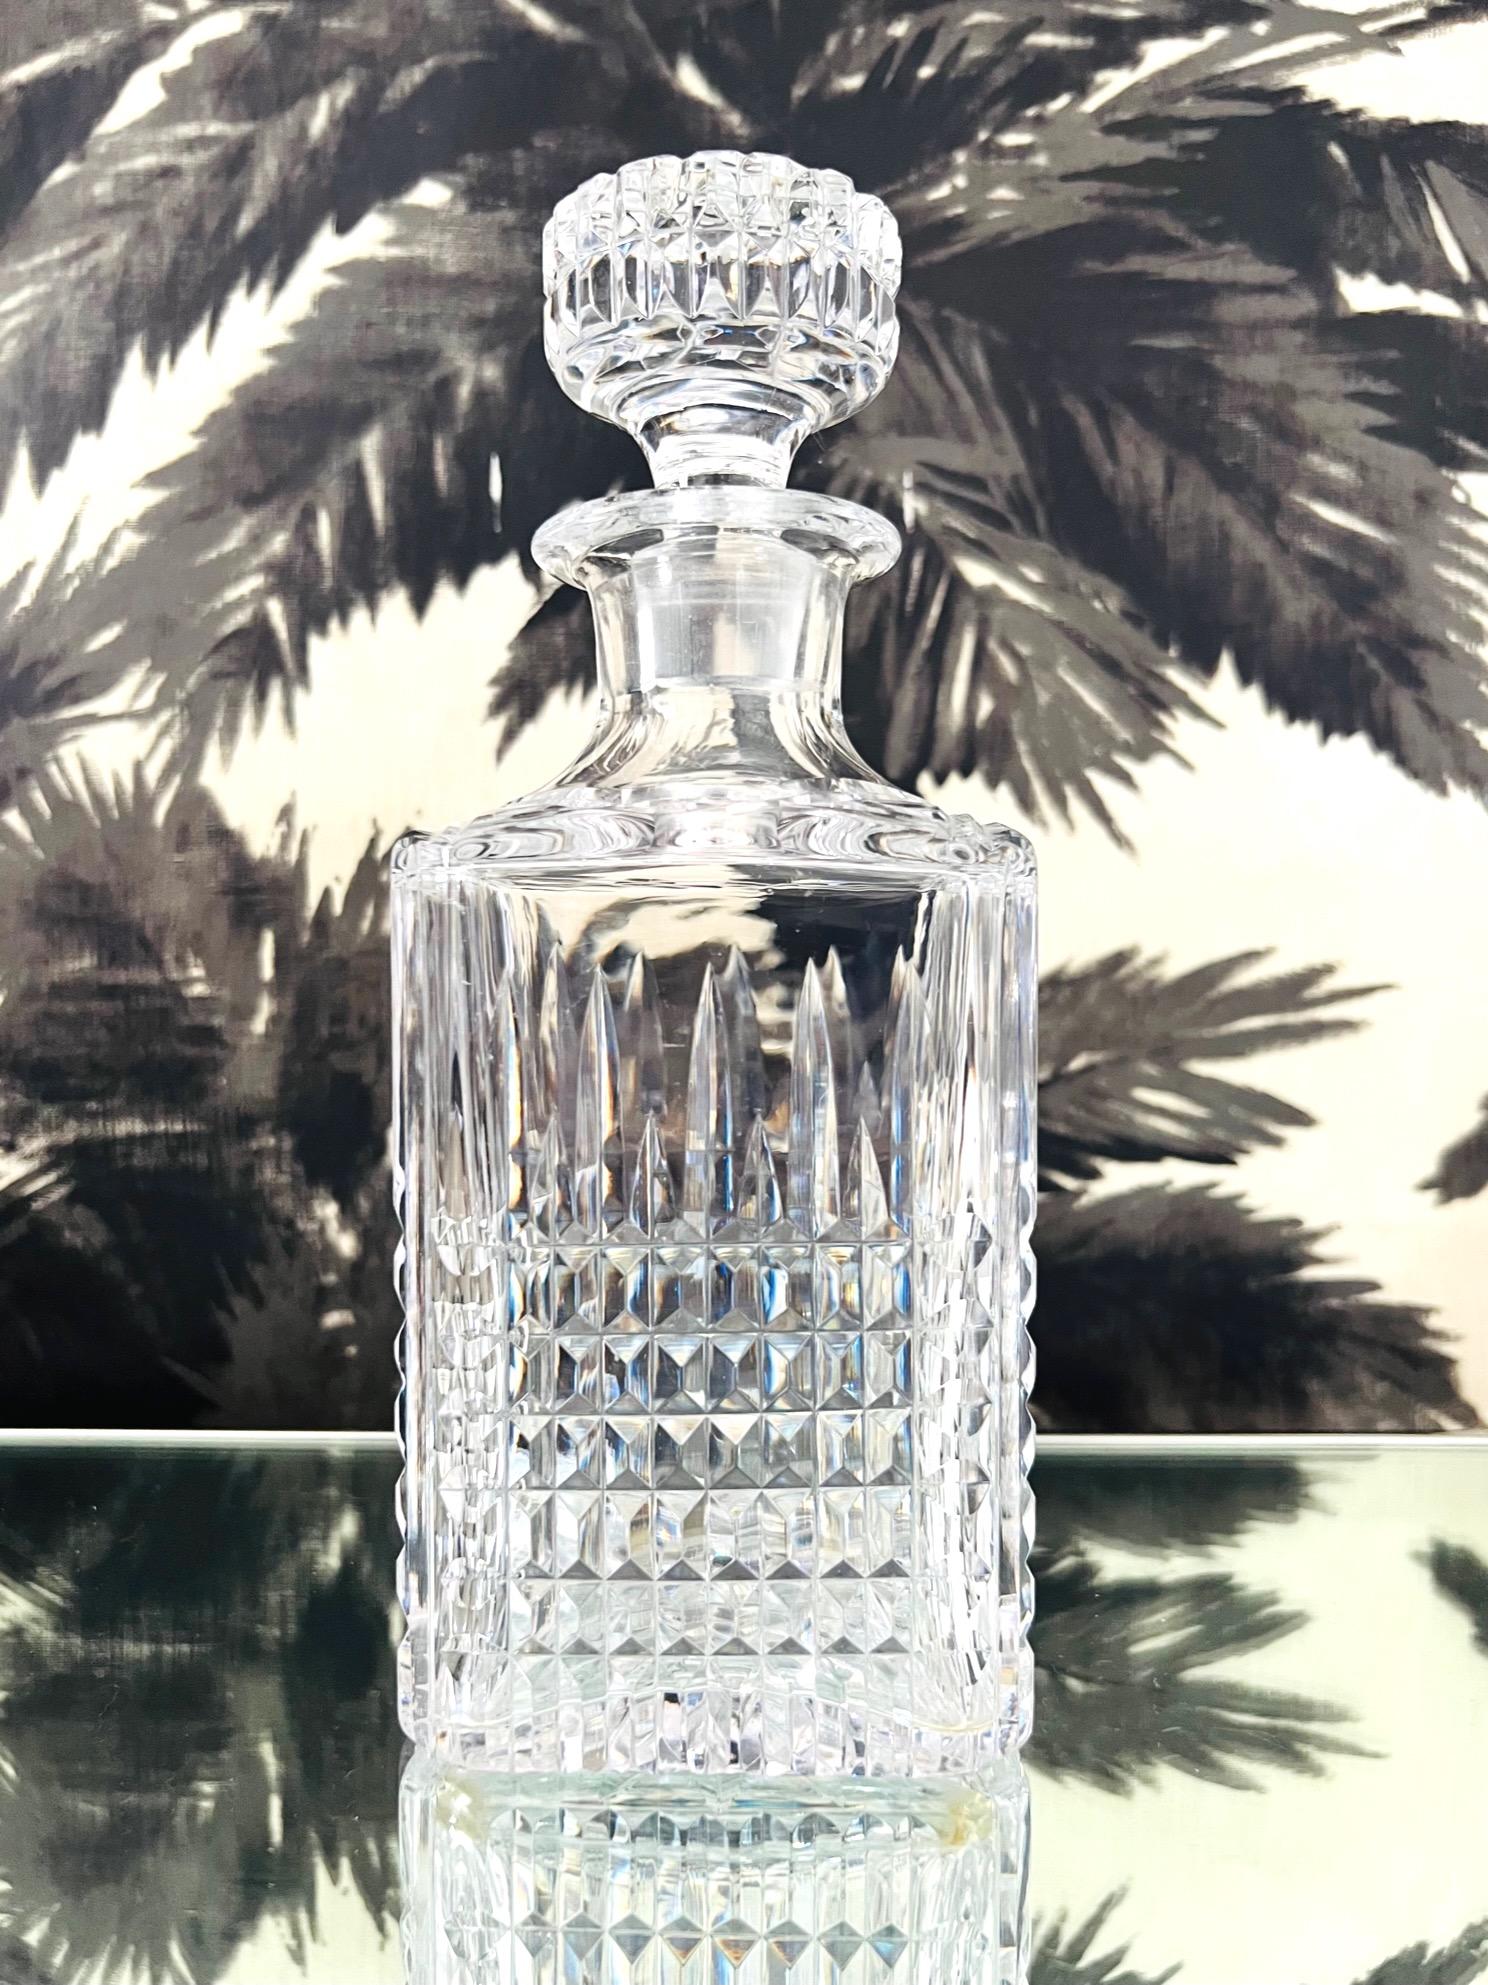 Vintage Waterford Crystal whiskey decanter with diamond cut pattern throughout. The decanter has a square form a stylized flat top stopper. Features an etched starburst on the underside has cross hatched patterns along the stem and top of the